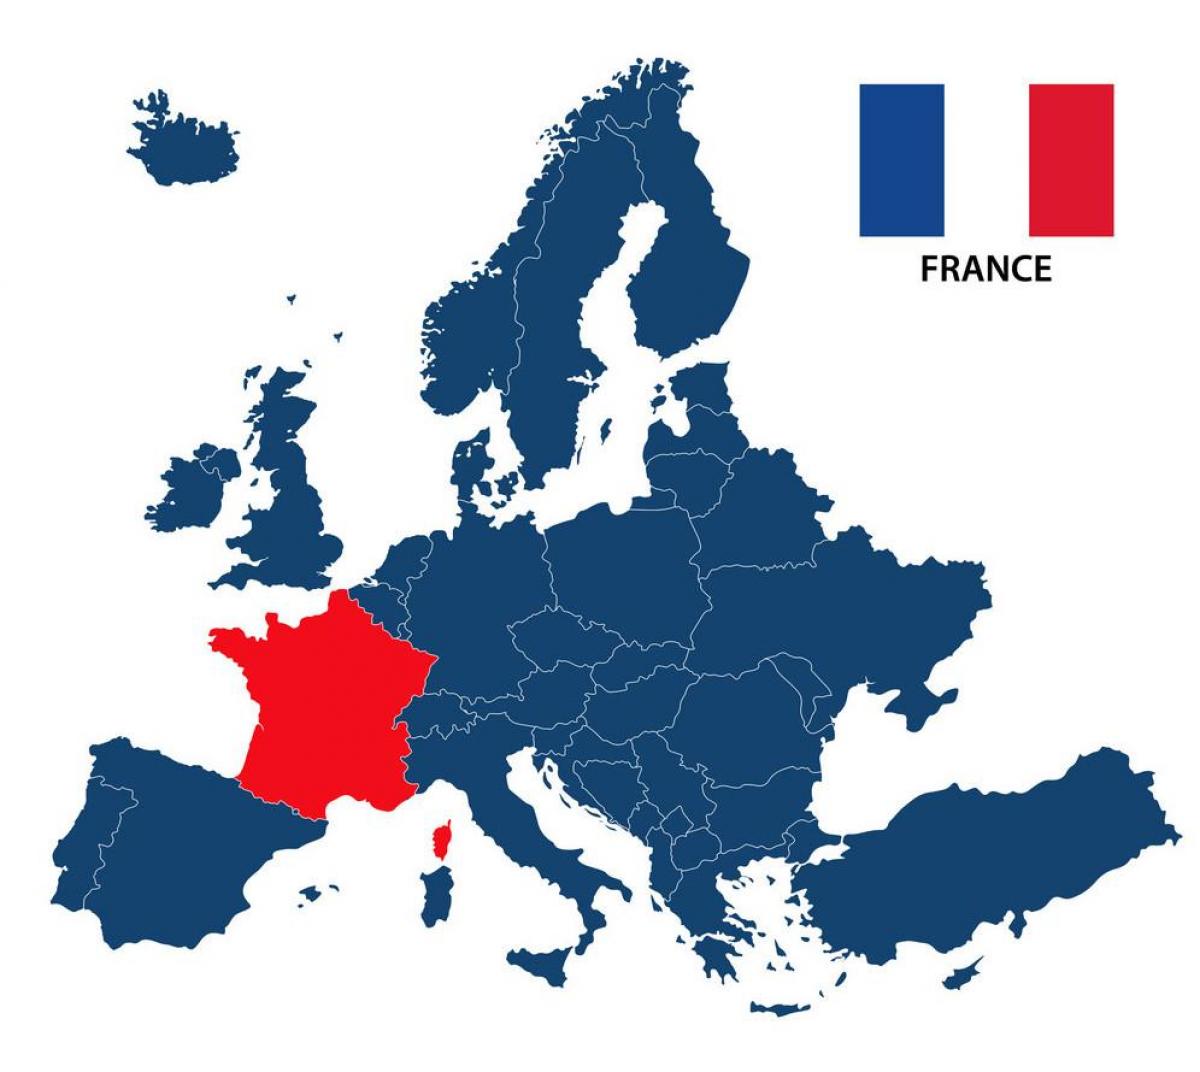 France location on the Europe map